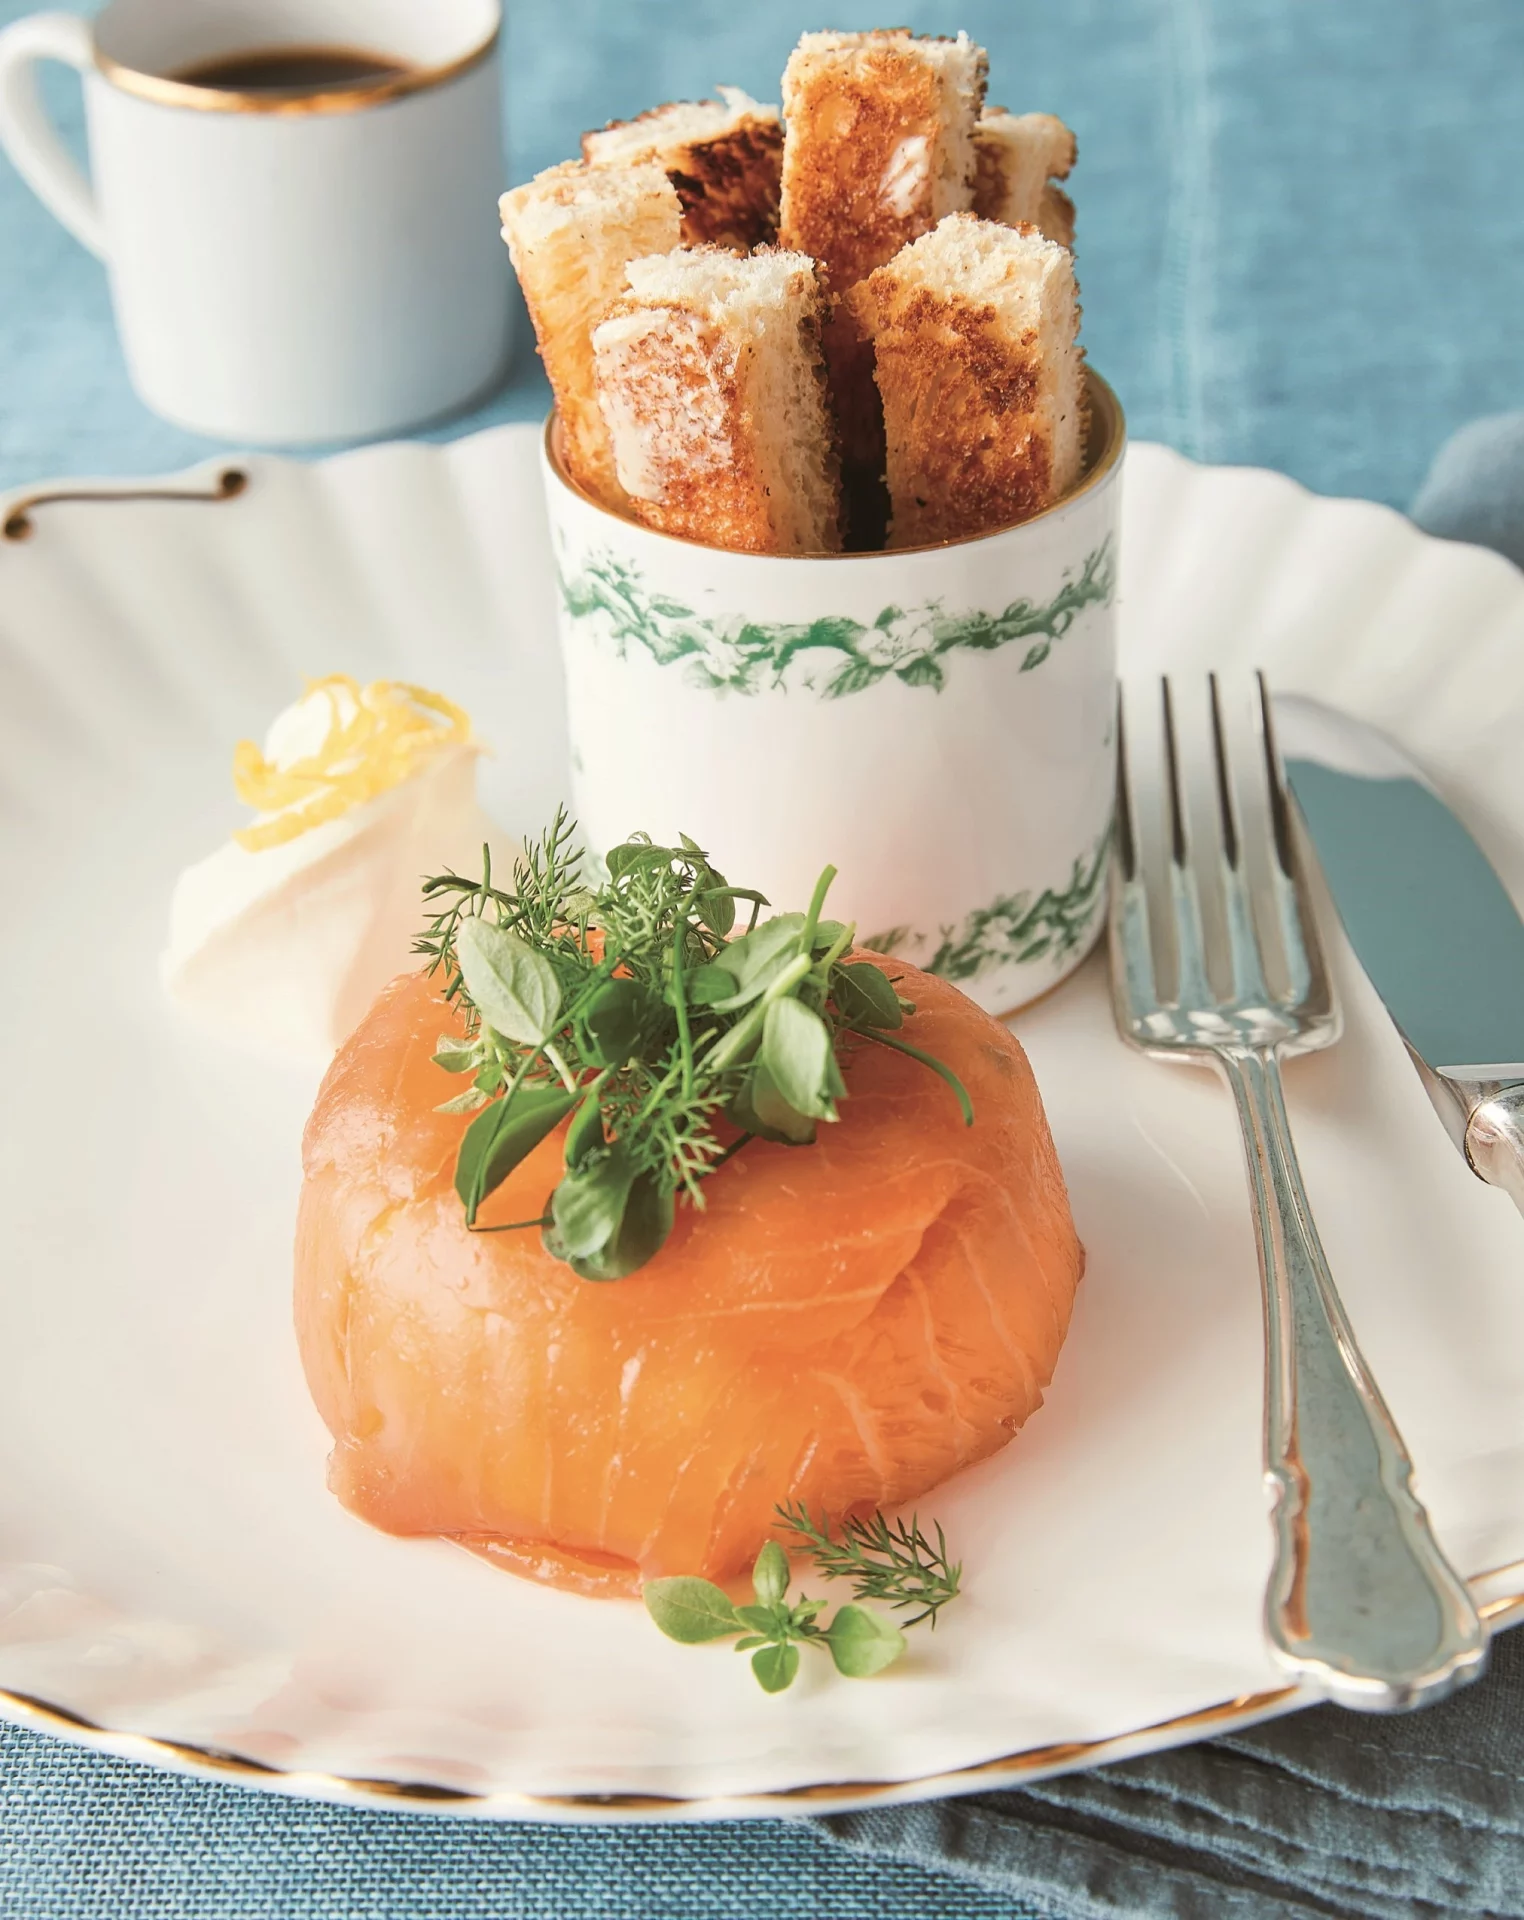 Scrambled Egg and Smoked Salmon Parcels